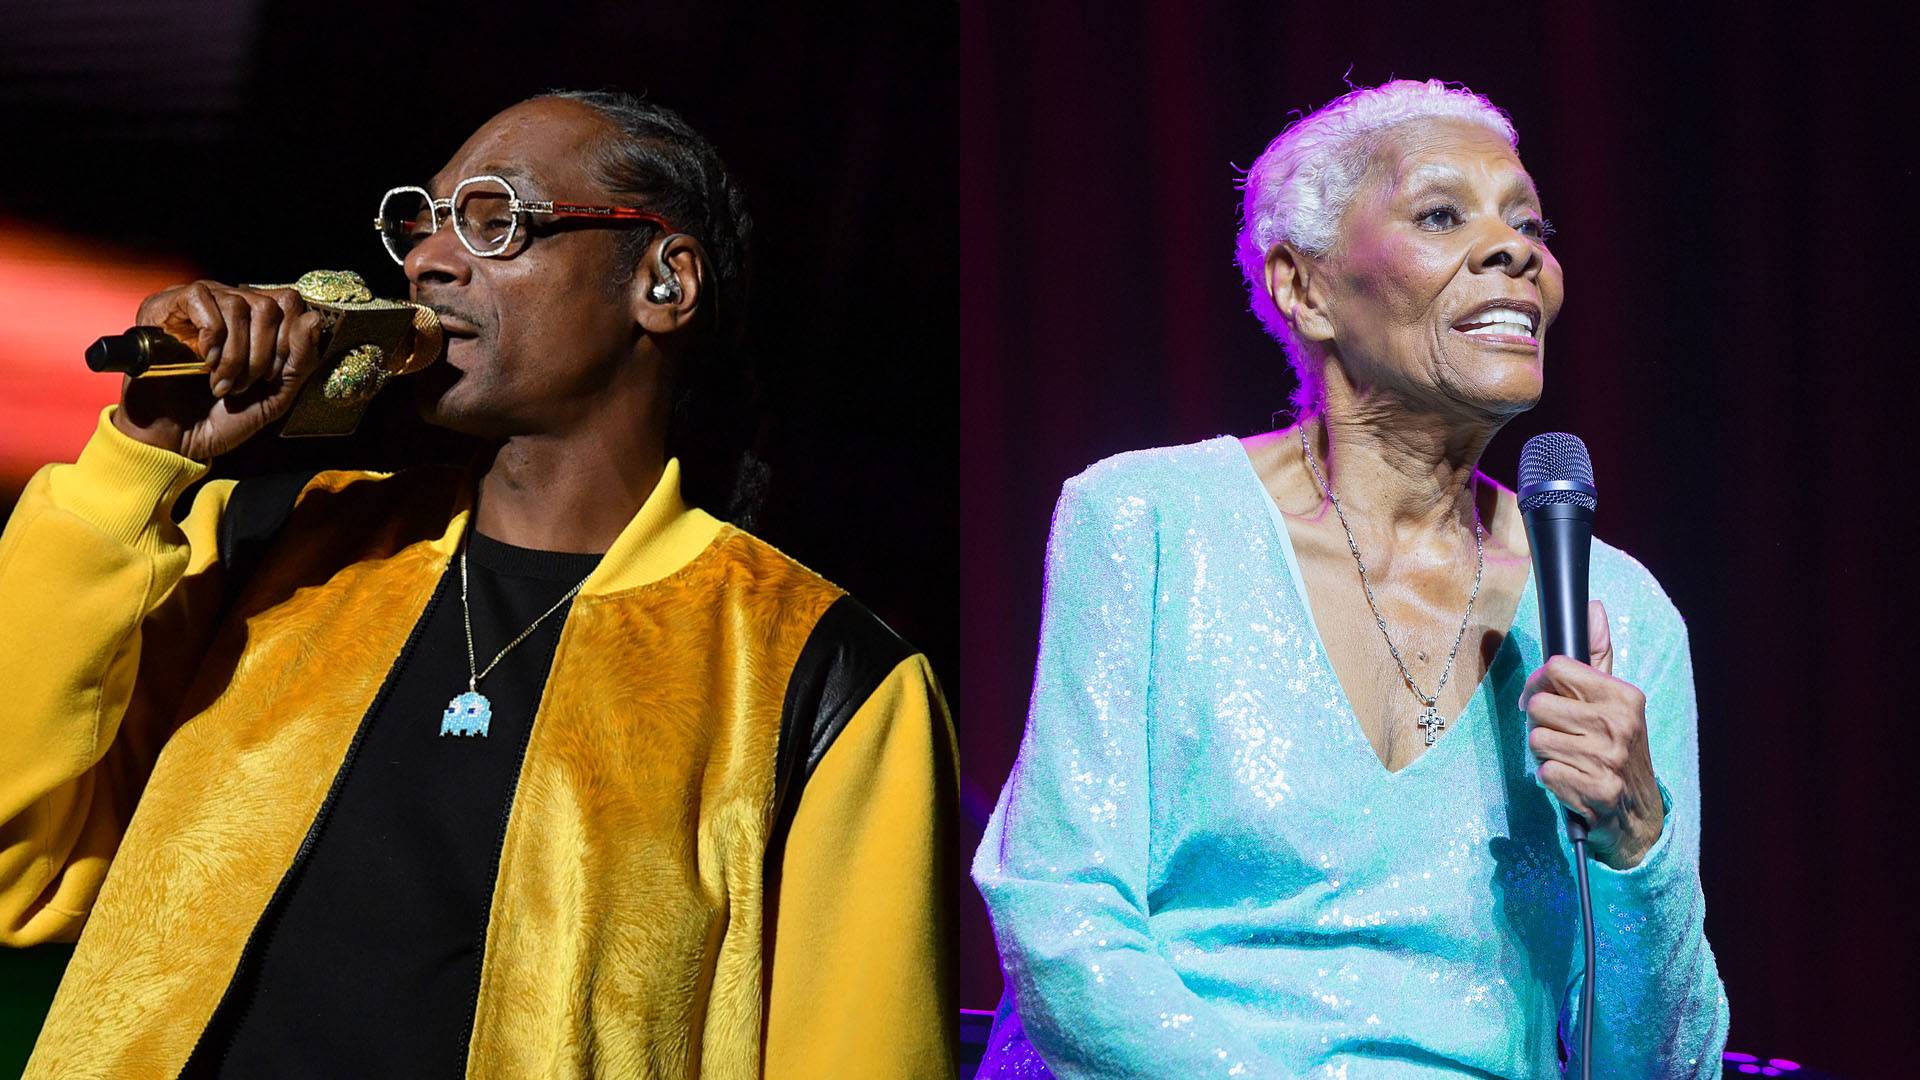 Snoop Dogg Recalls Being “Checked” By Dionne Warwick About His Lyrics